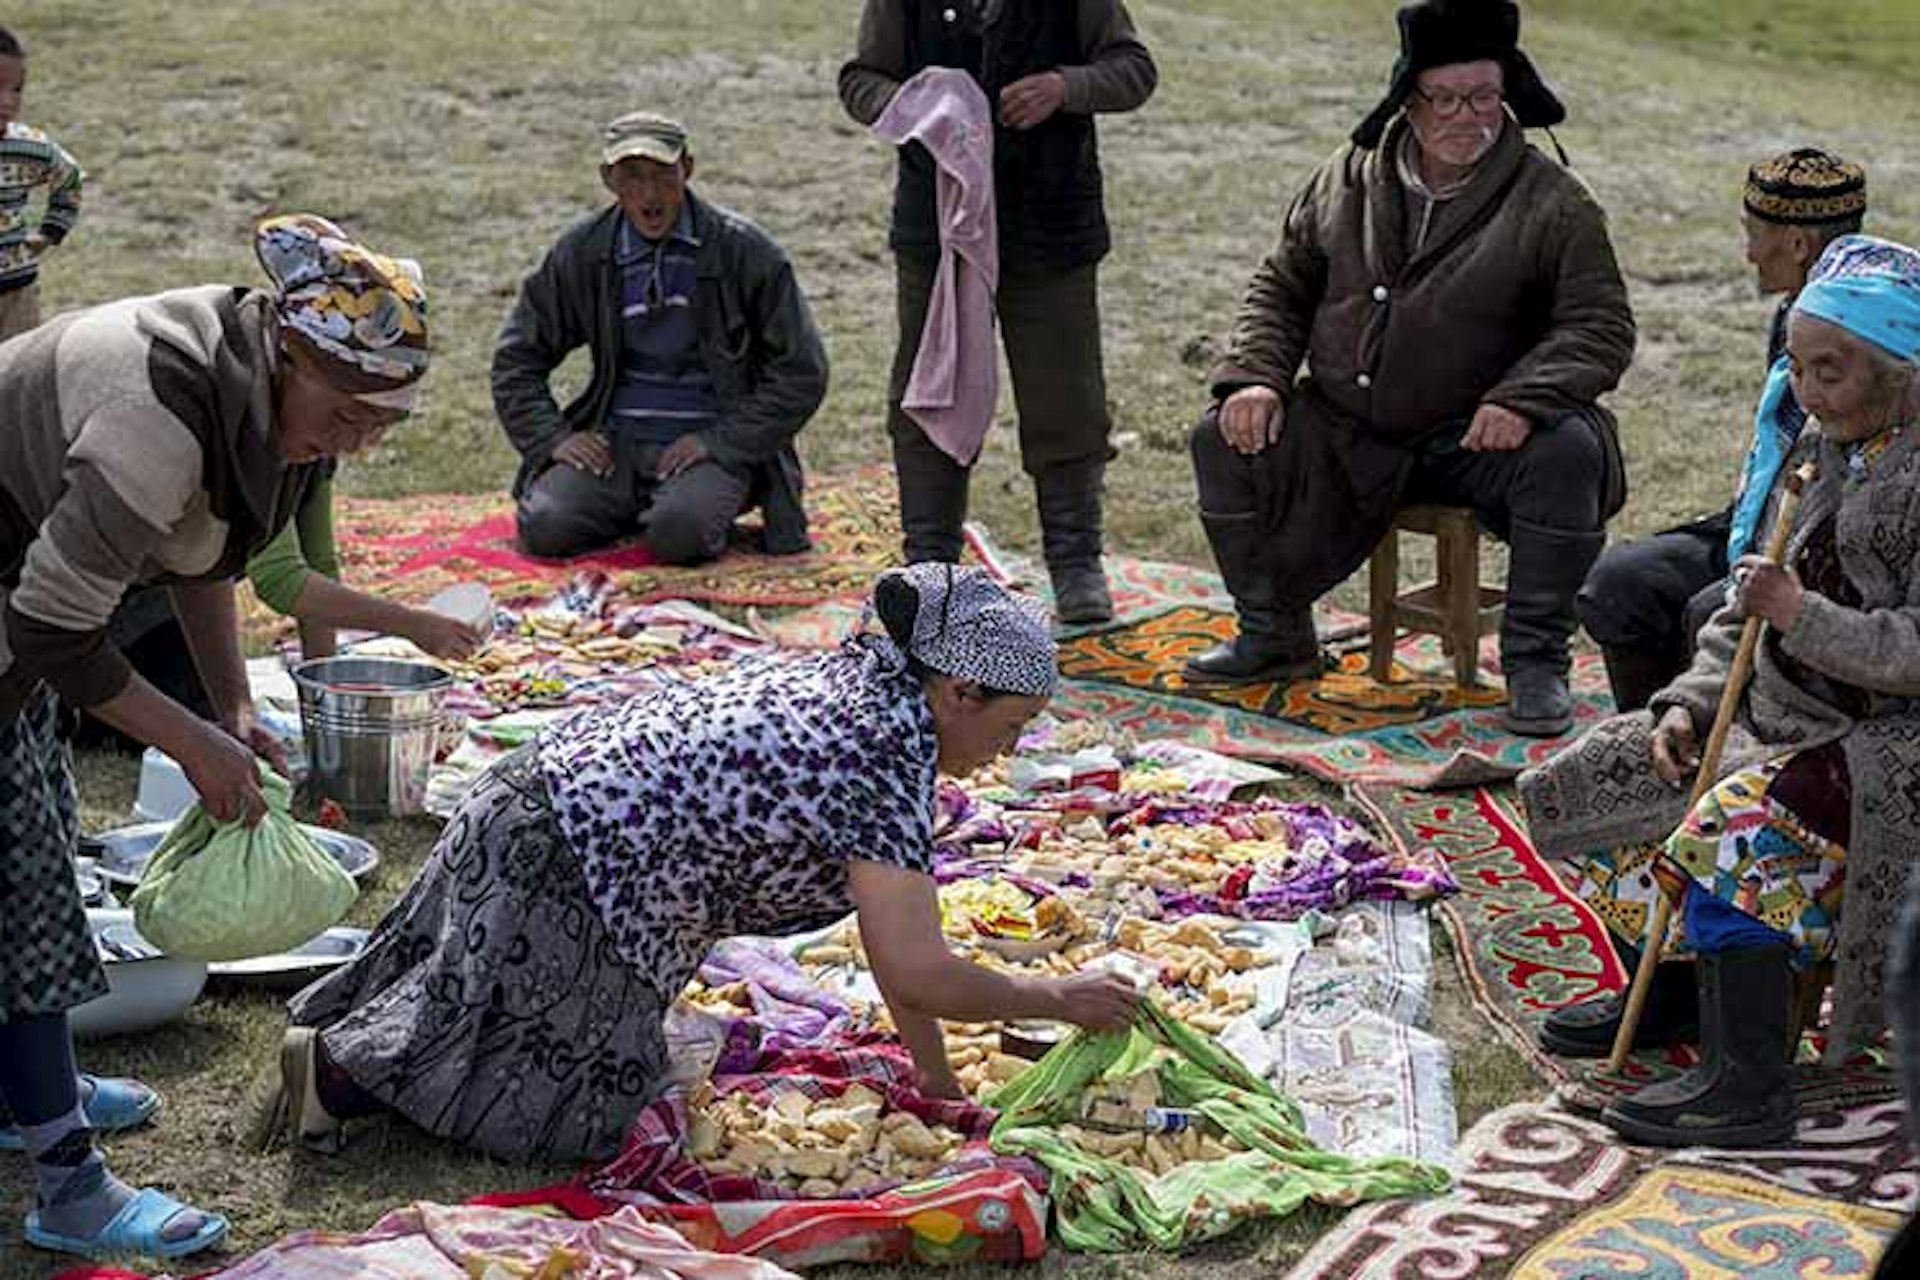 Feast day in the nomads' camp. Image by David Baxendale / Lonely Planet